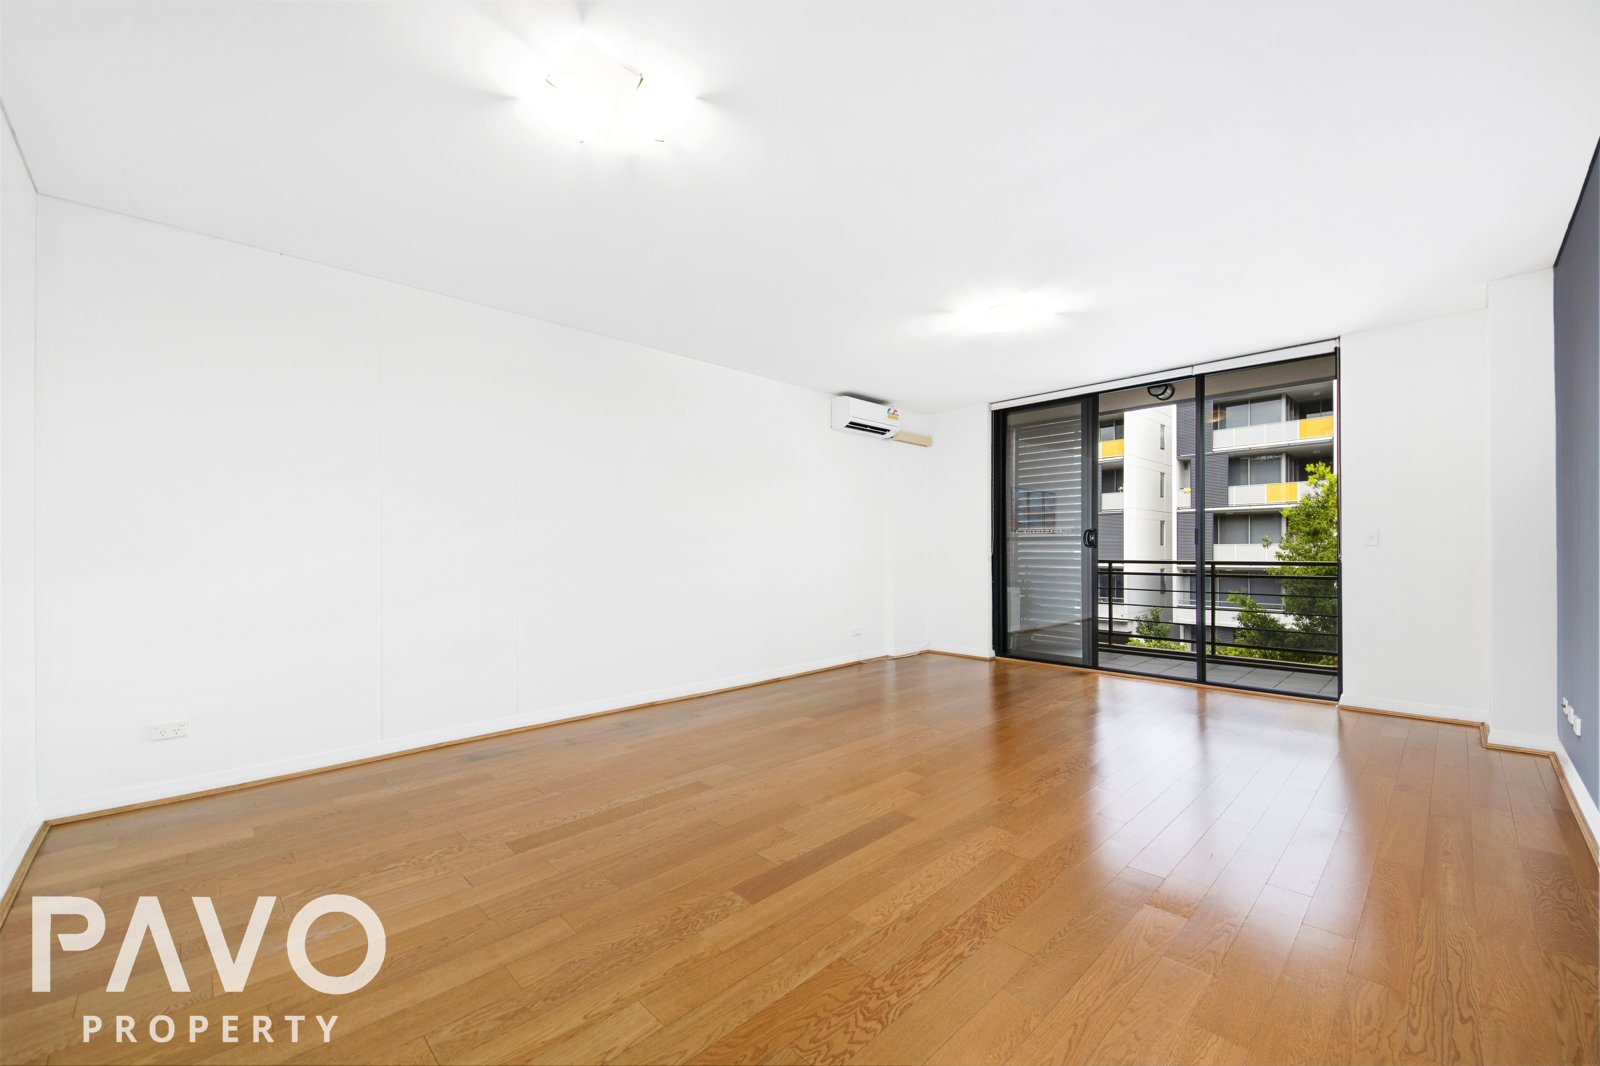 Ryde, New South Wales 2112, 2 Bedrooms Bedrooms, ,2 BathroomsBathrooms,Apartment,For Sale,1005